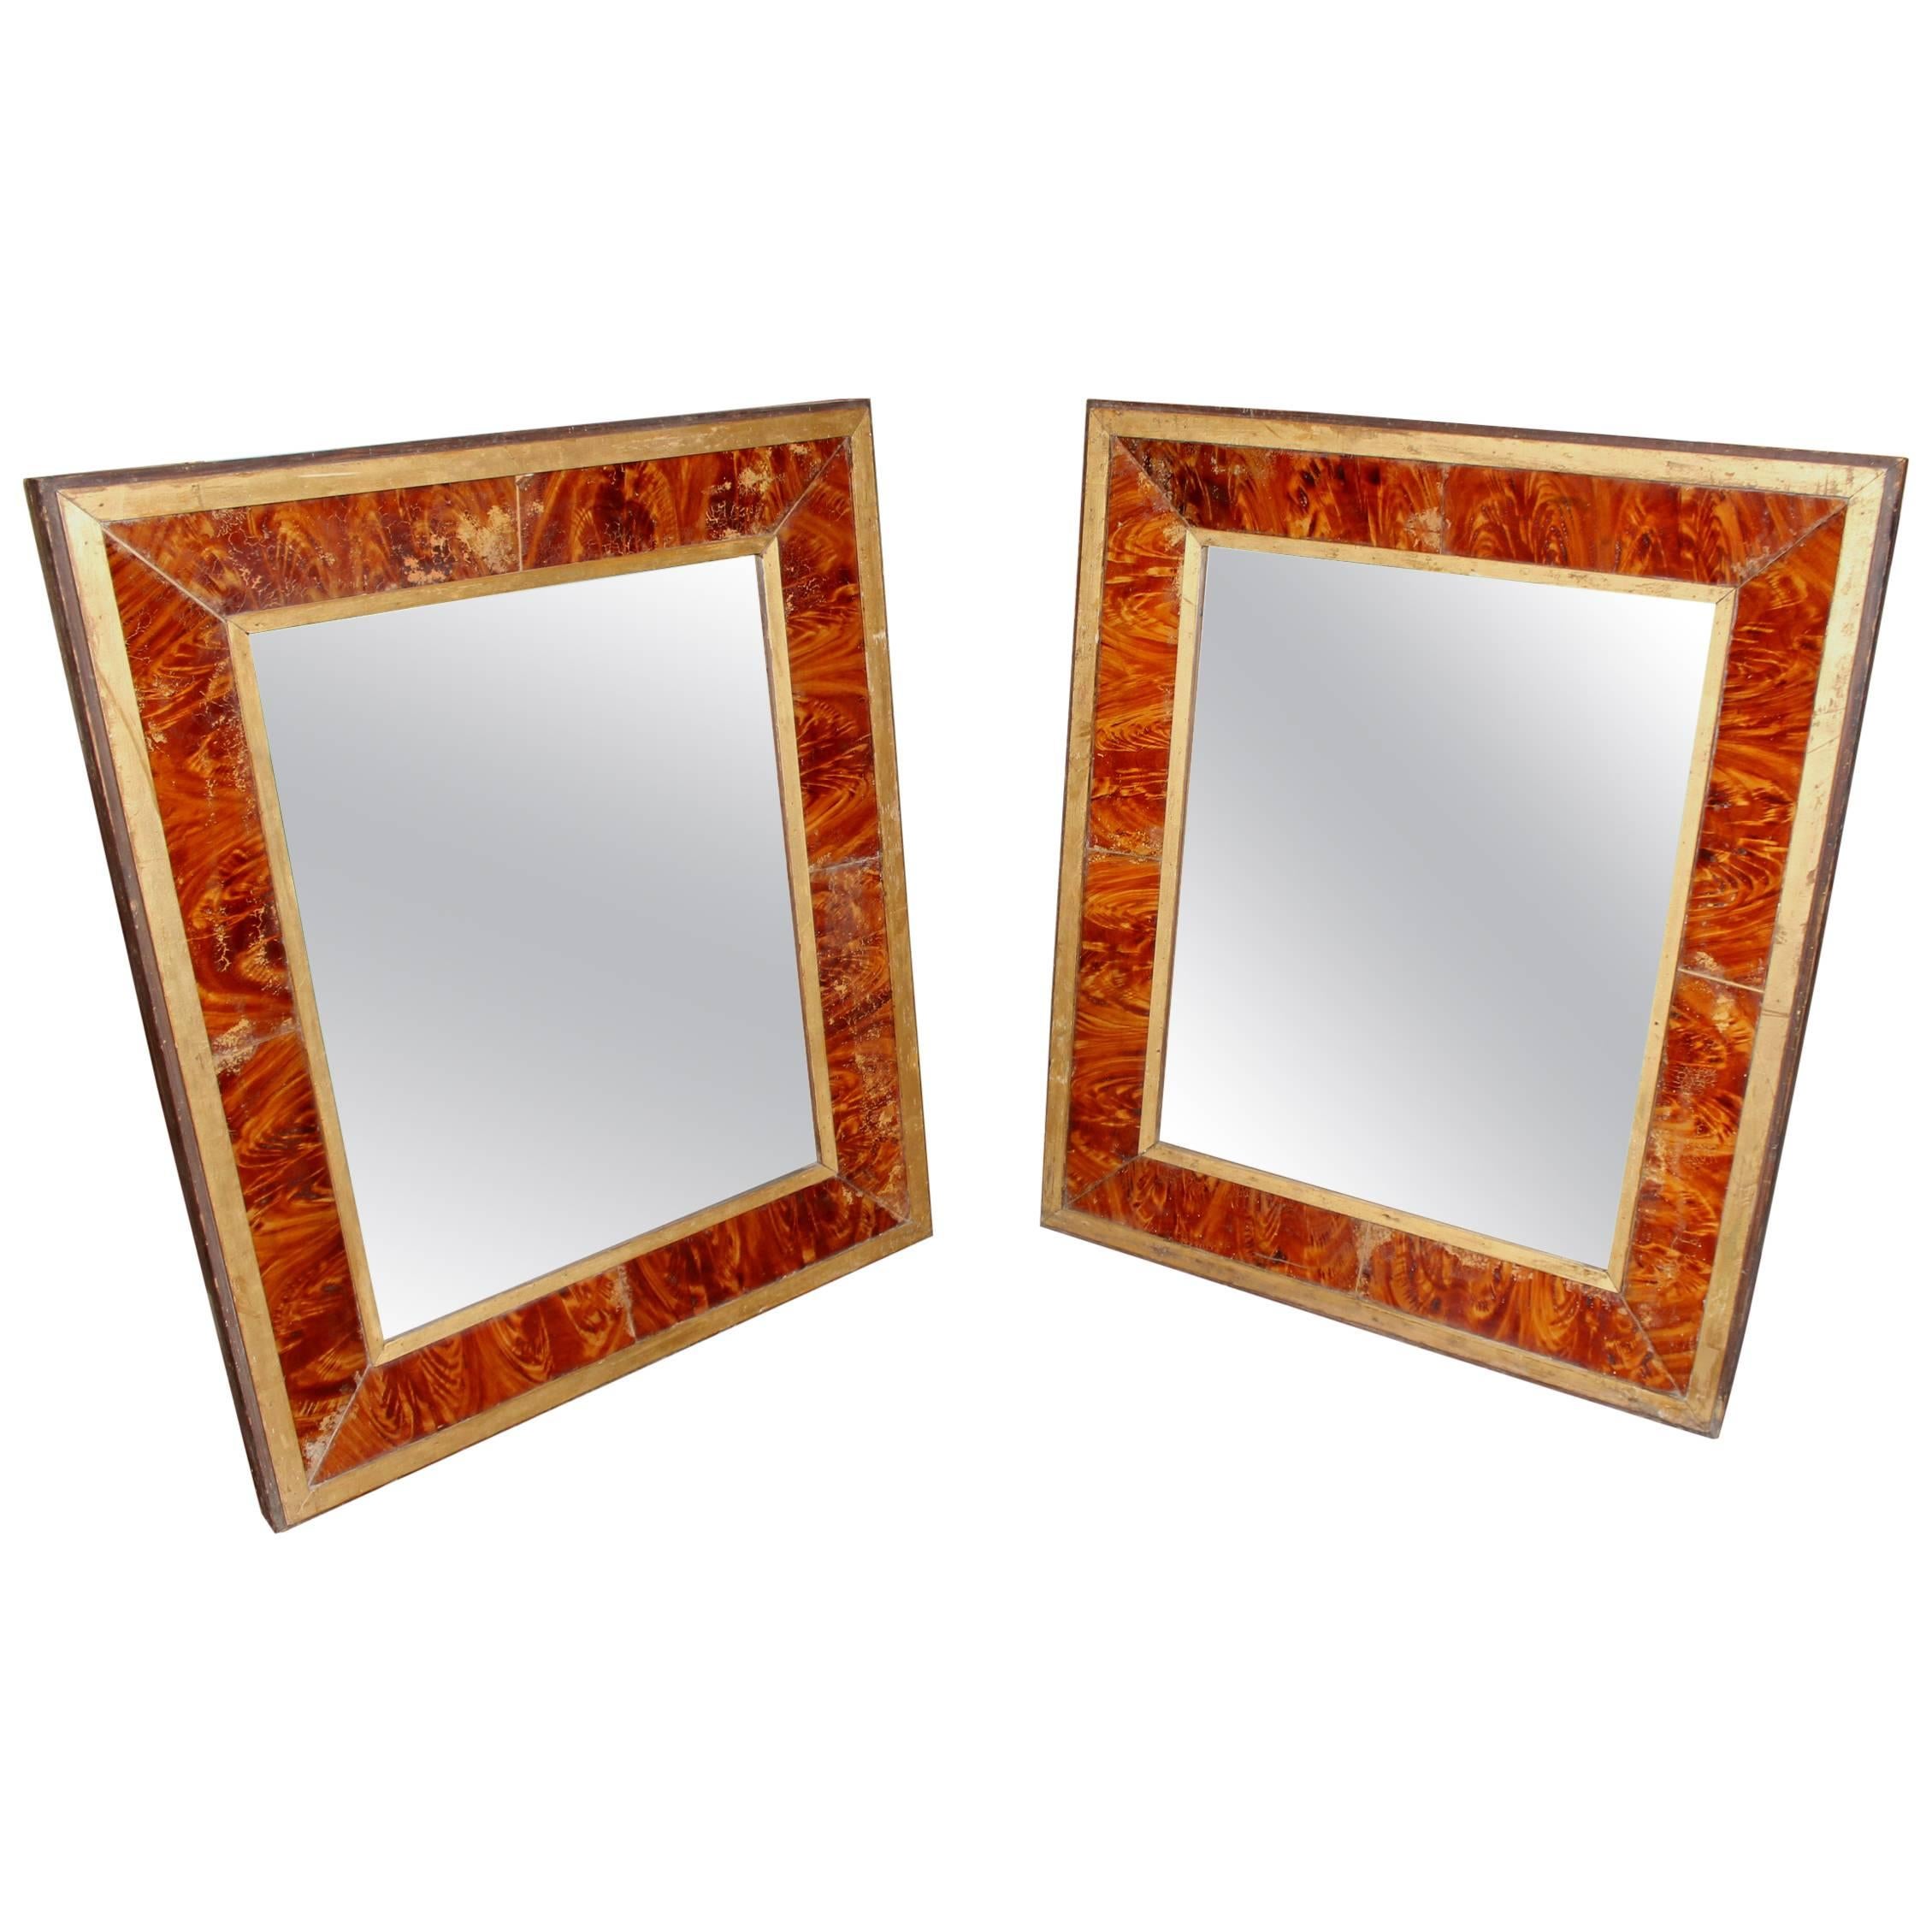 Pair of 19th Century Églomisé Faux Wood Grain Frames with Mirrors